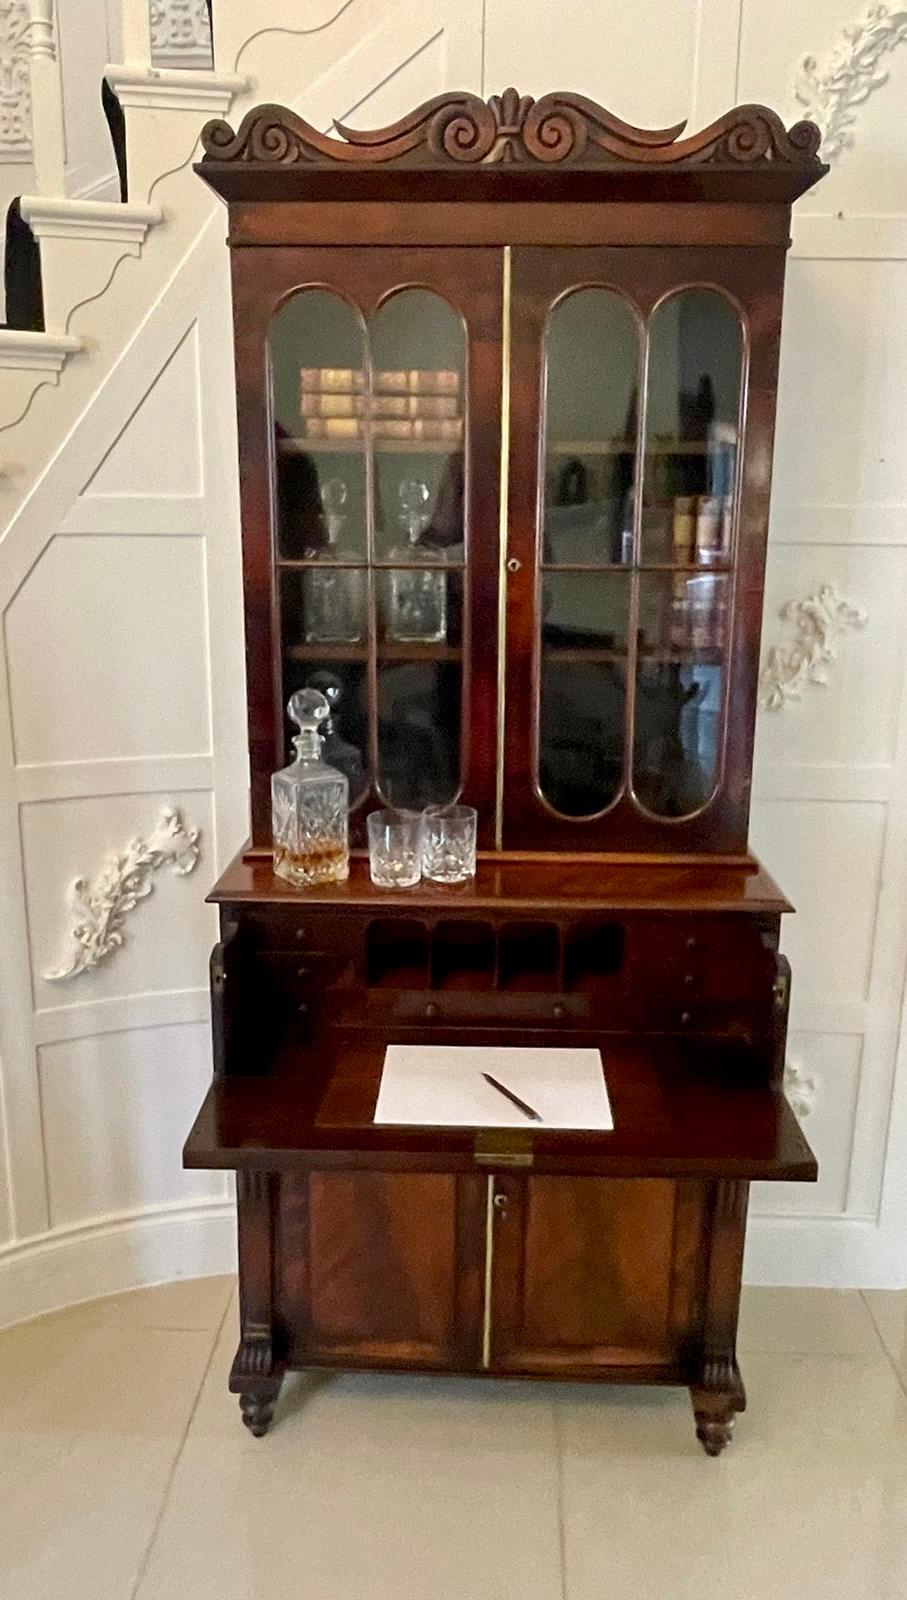 Small antique Regency quality figured mahogany secretaire bookcase having a quality carved mahogany cornice above a pair of unusual glazed moulded doors opening to reveal two adjustable shelves above a figured mahogany secretaire drawer with